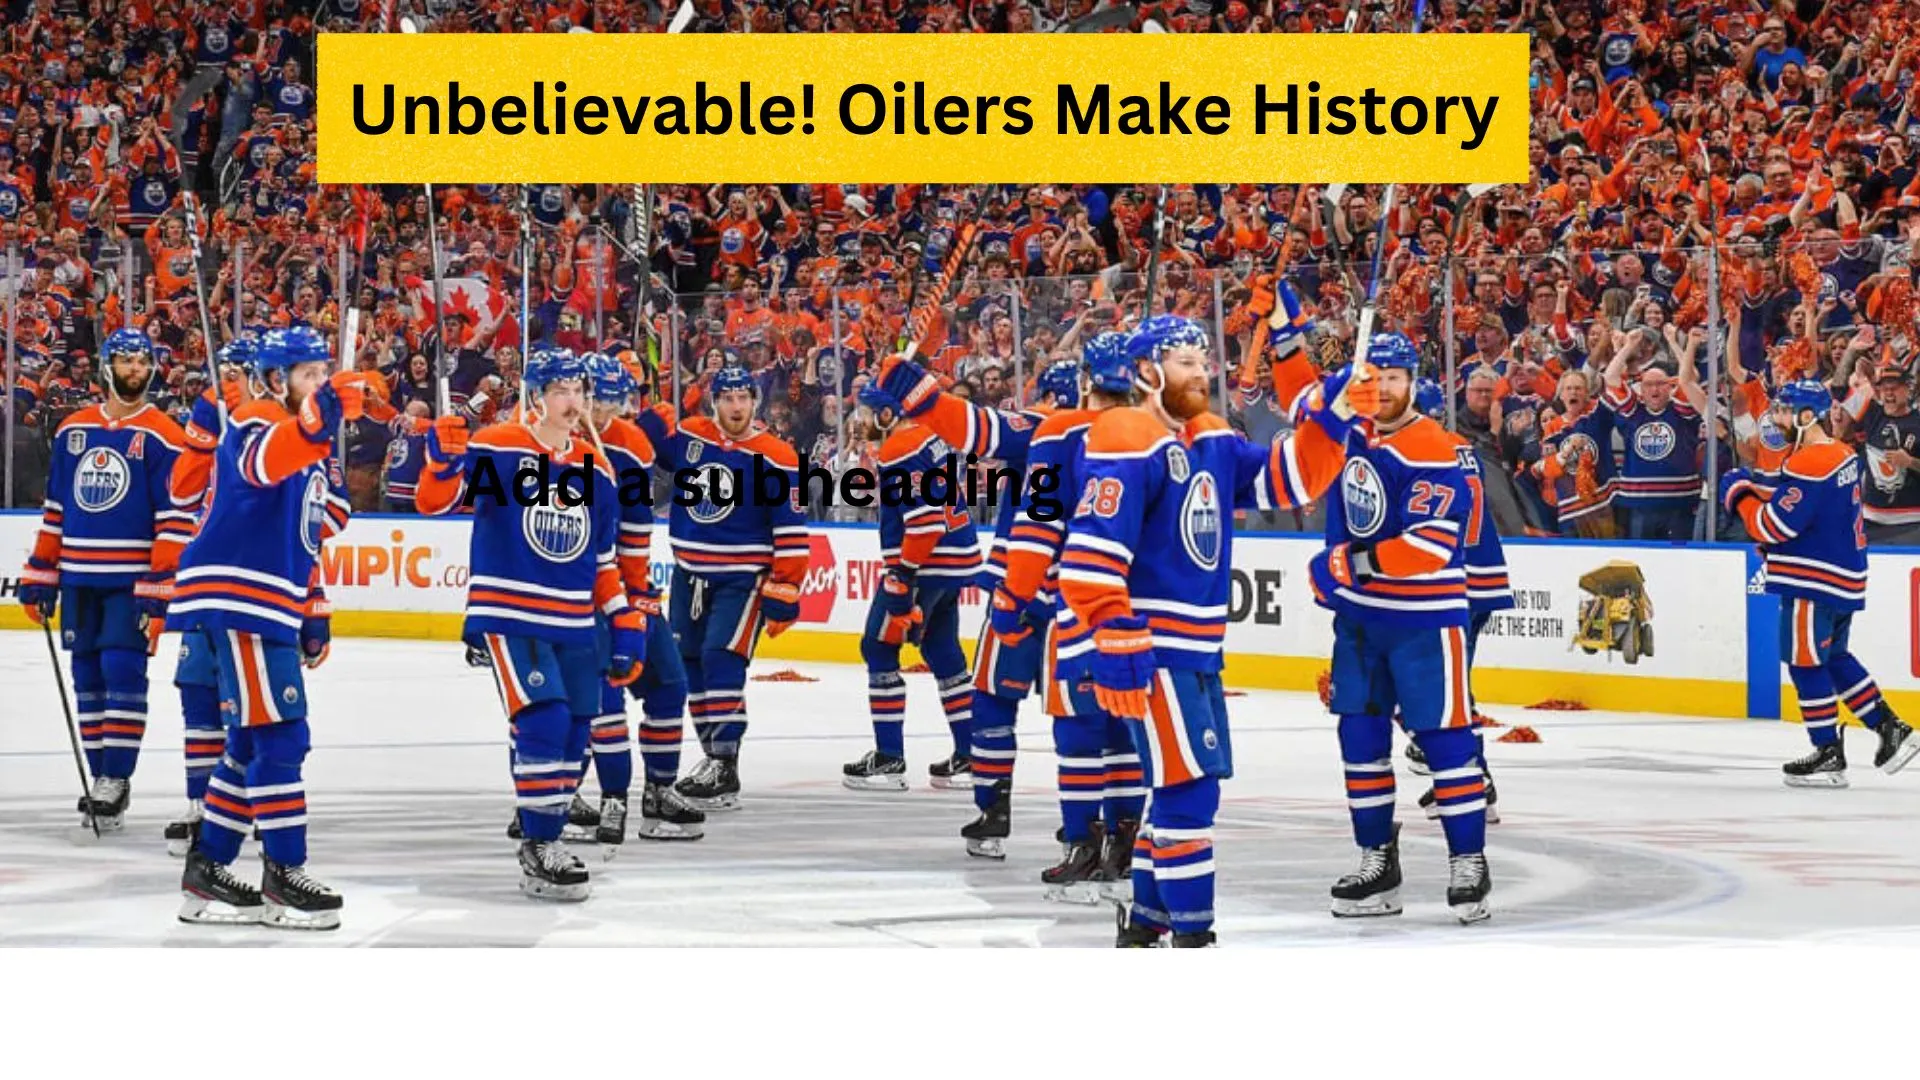 Unbelievable! Oilers Make History with Sensational Rally to Game 7